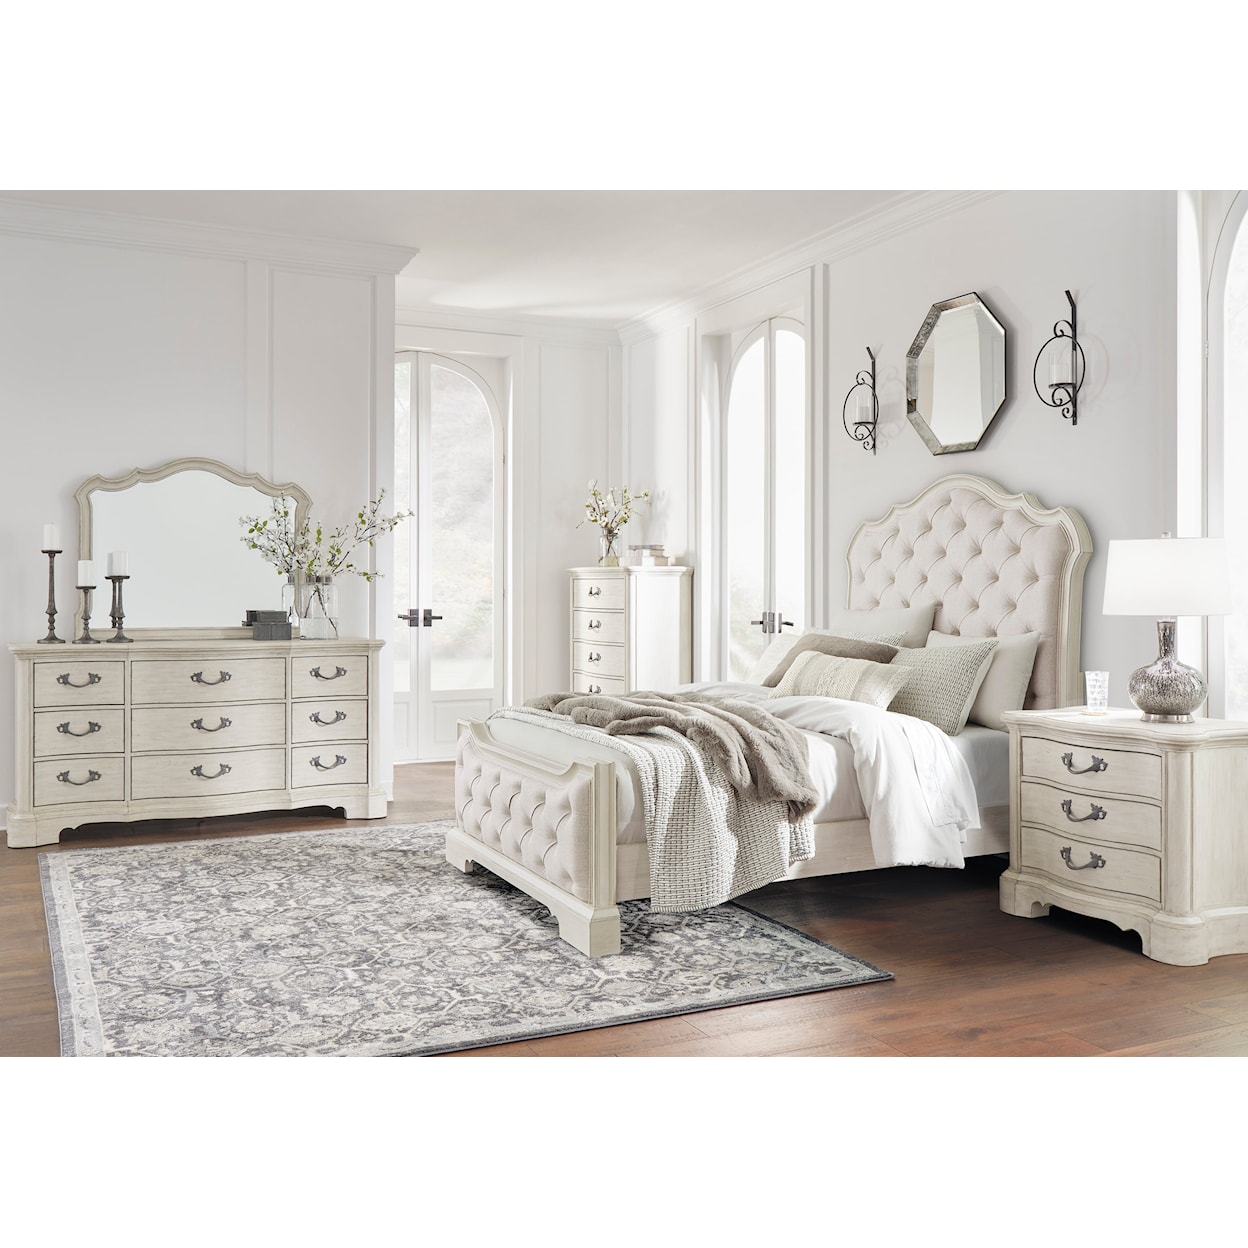 Signature Design by Ashley Arlendyne Queen Bed